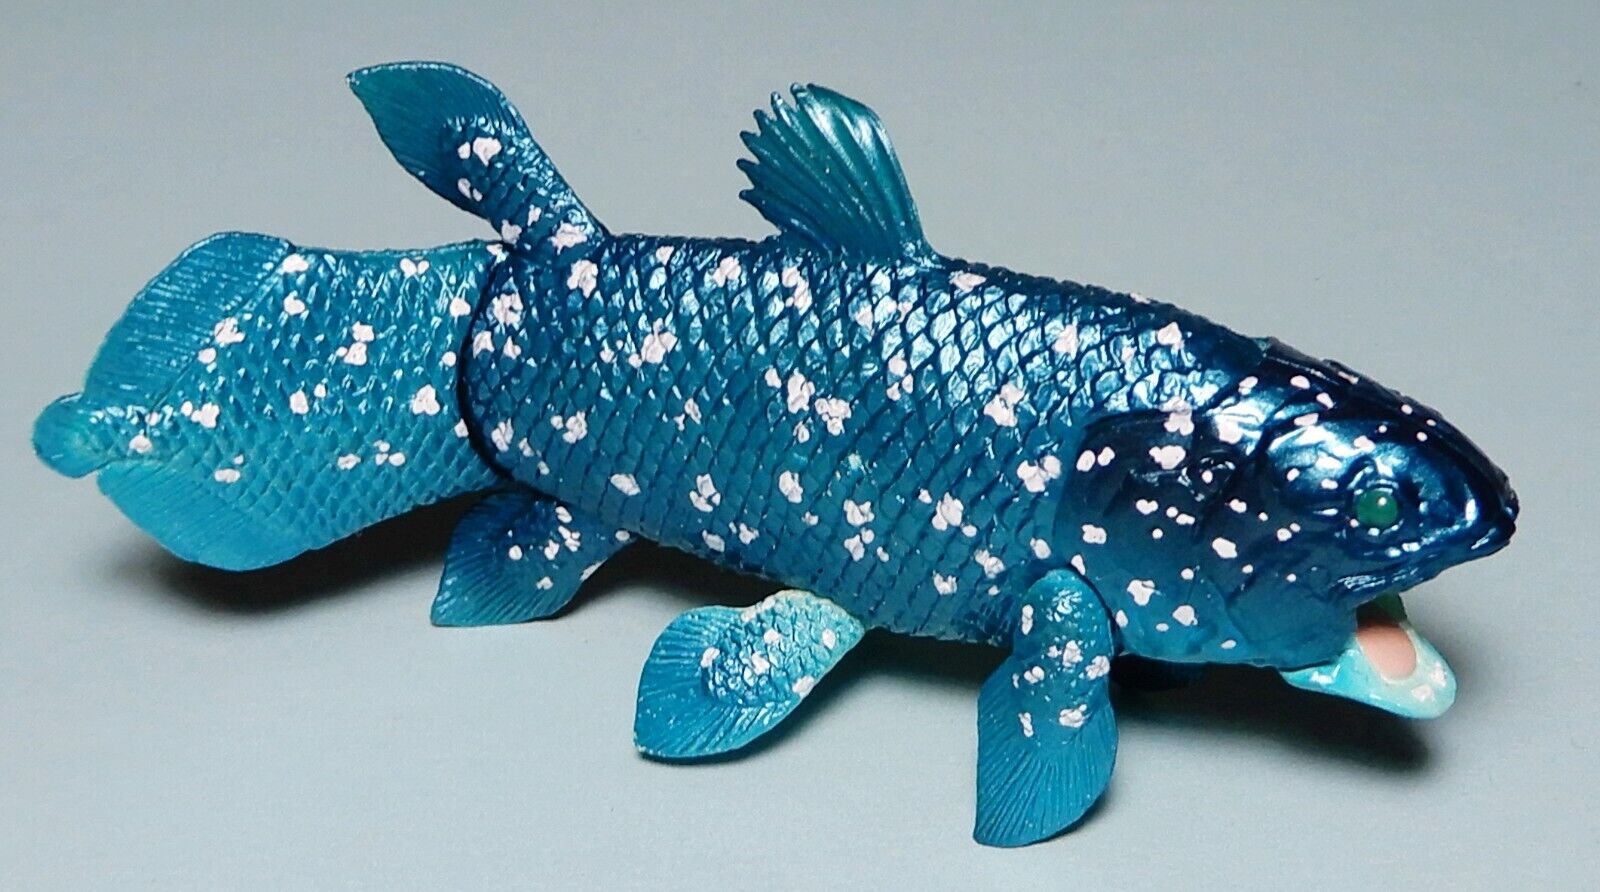 Takara Tomy ARTS Ancient Sea Creature Coelacanth movable figure US seller New